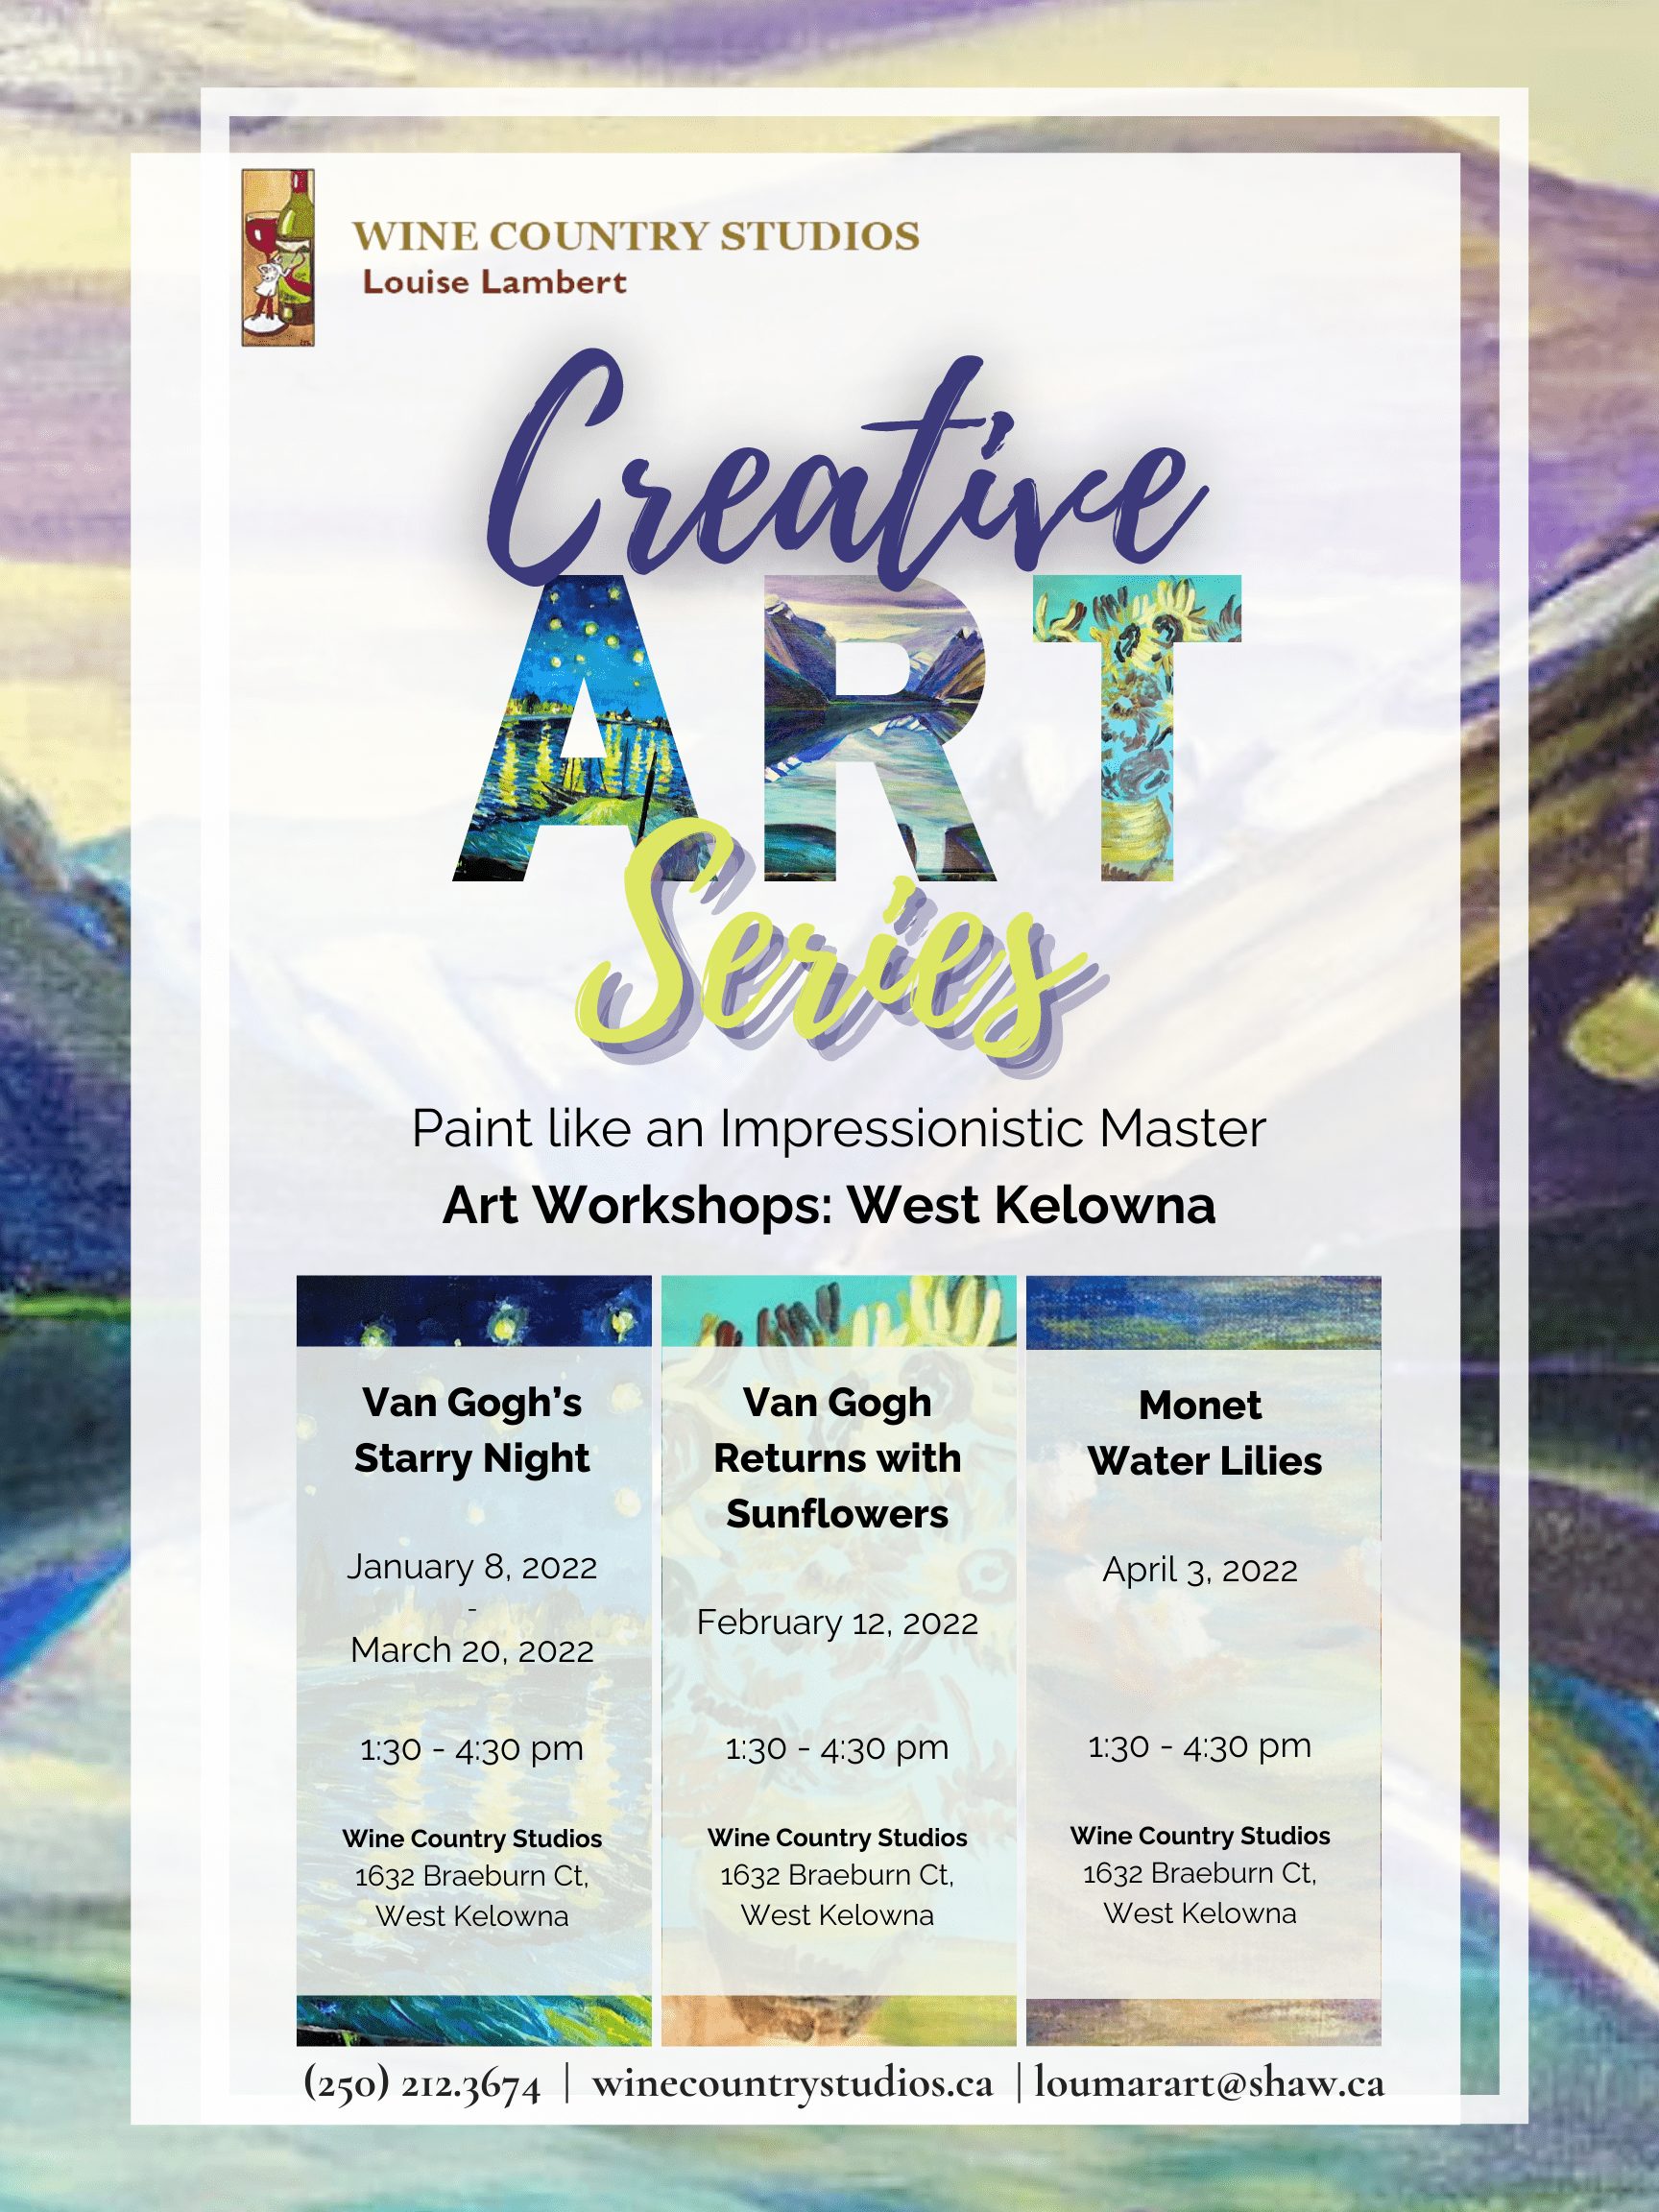 Creative Art Series Poster: Paint like an Impressionistic Master